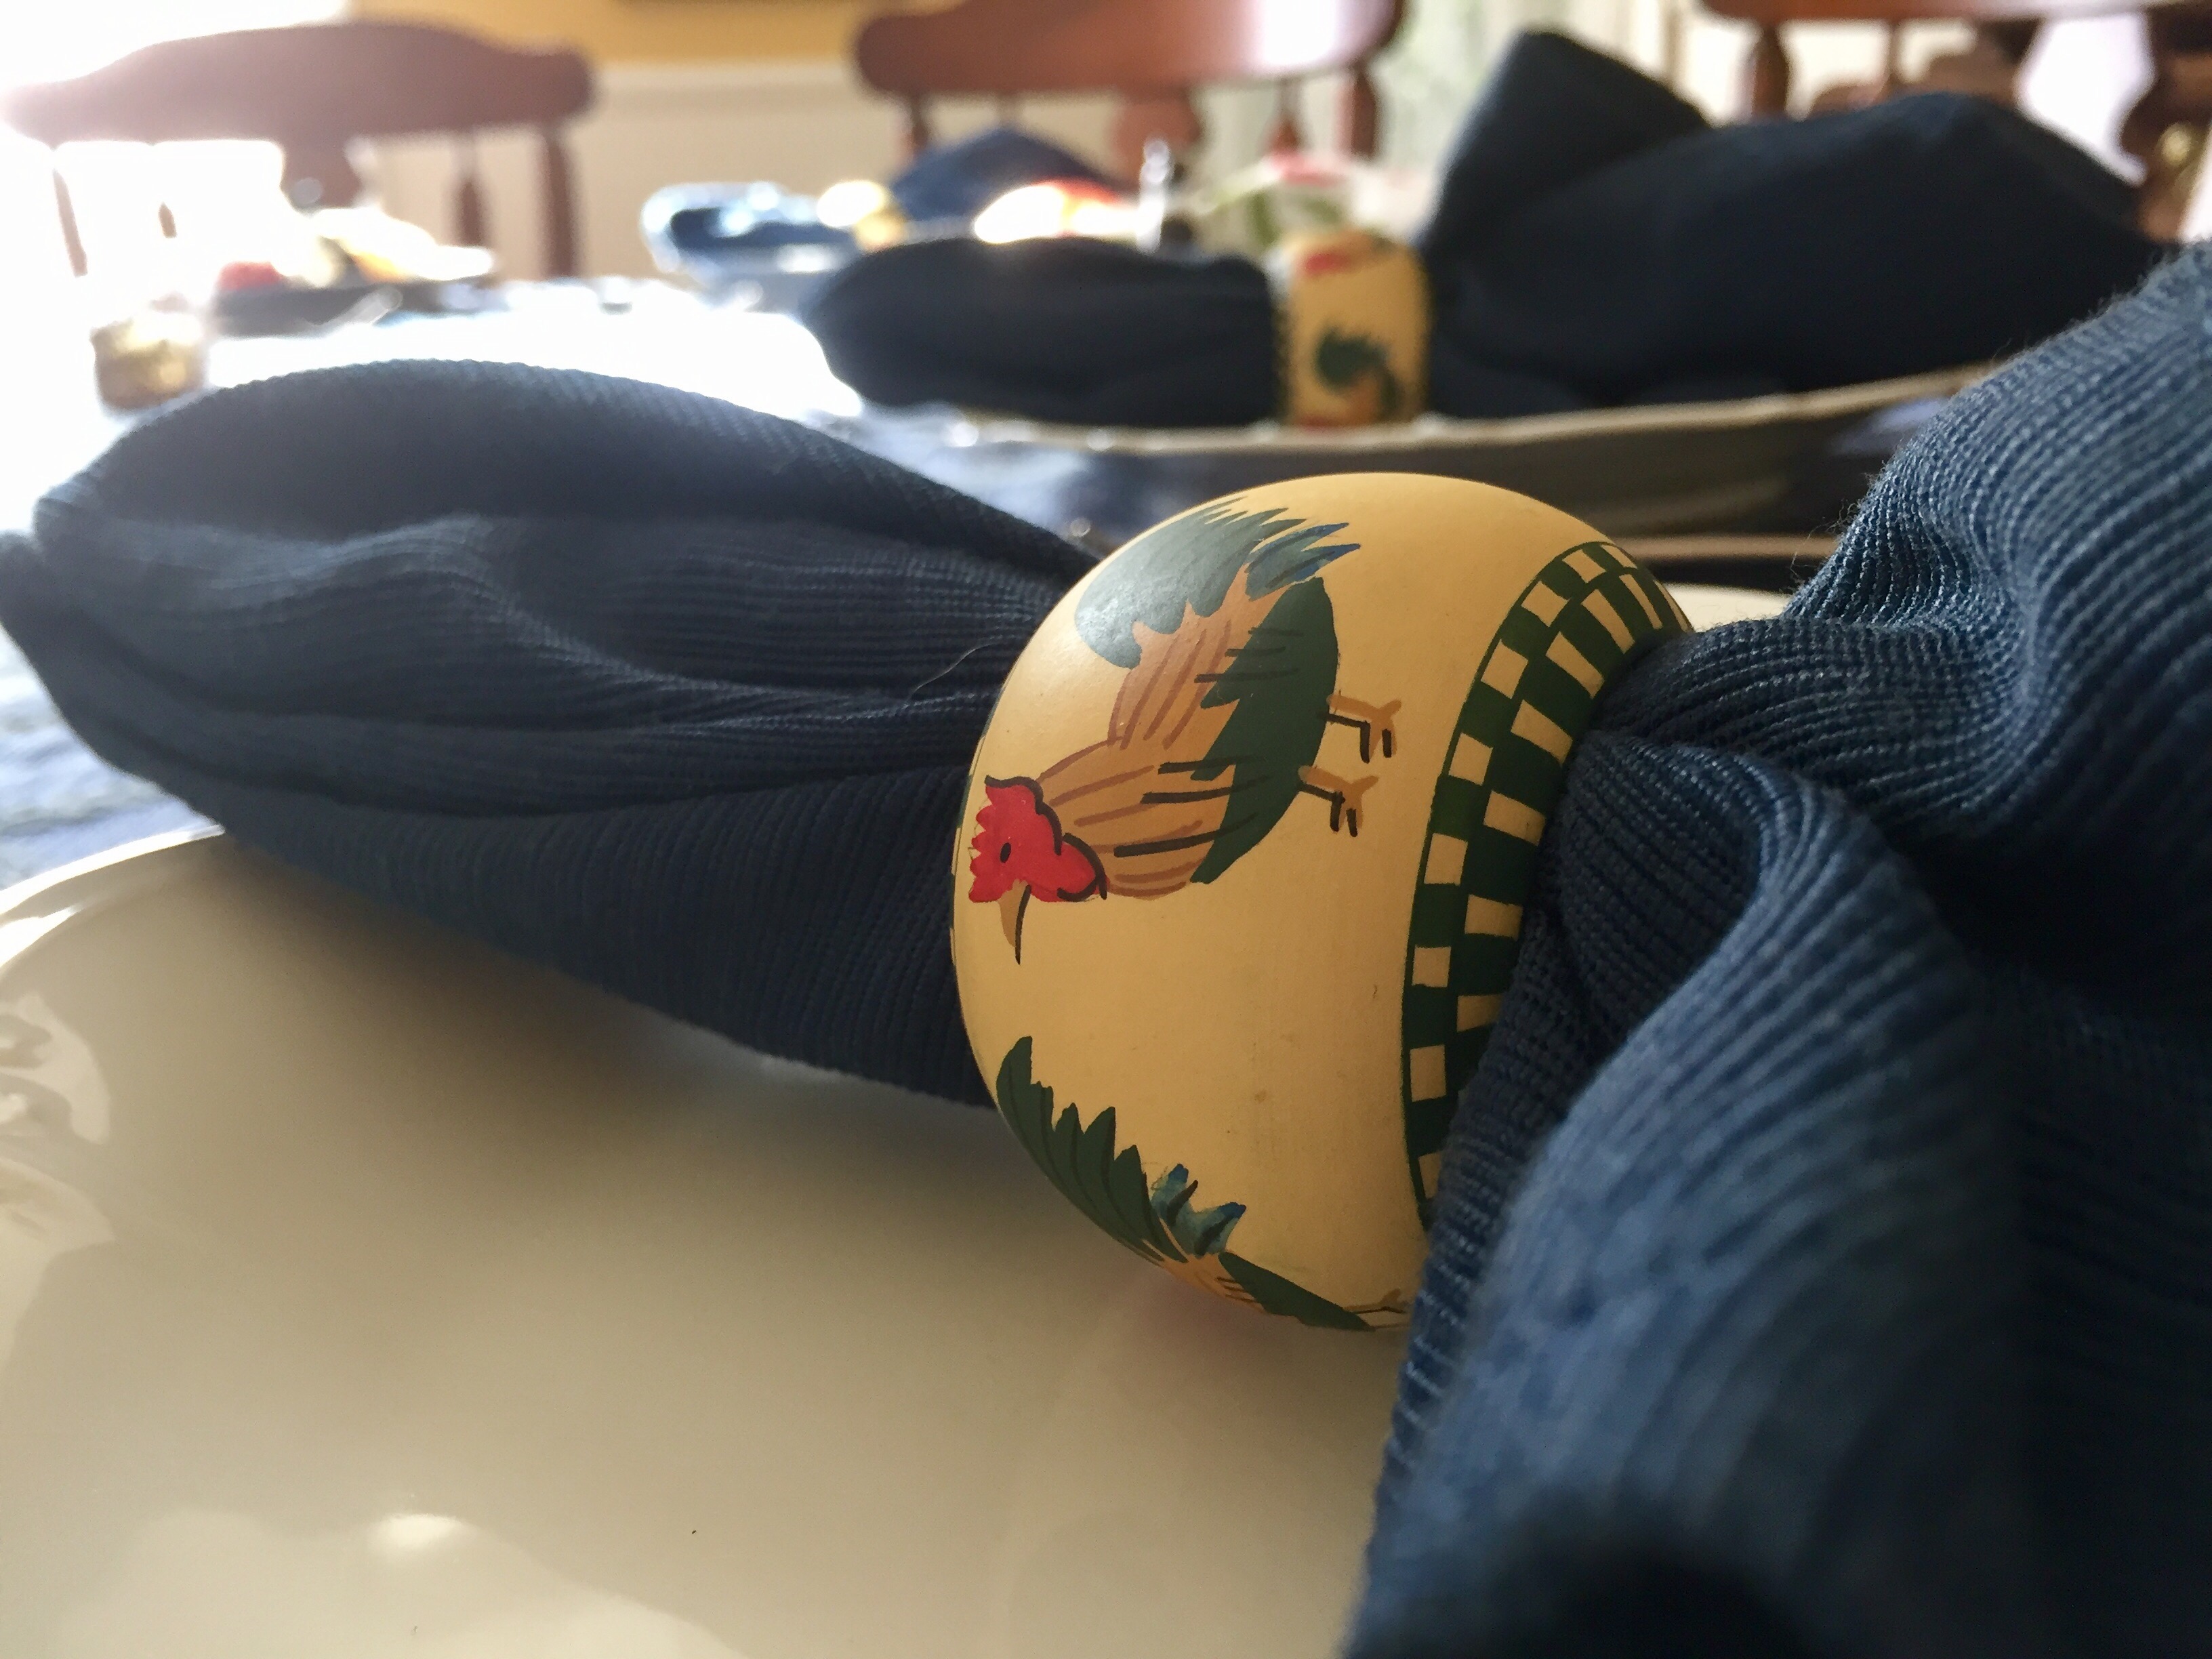 Chicken napkin rings to honor Locally Laid.